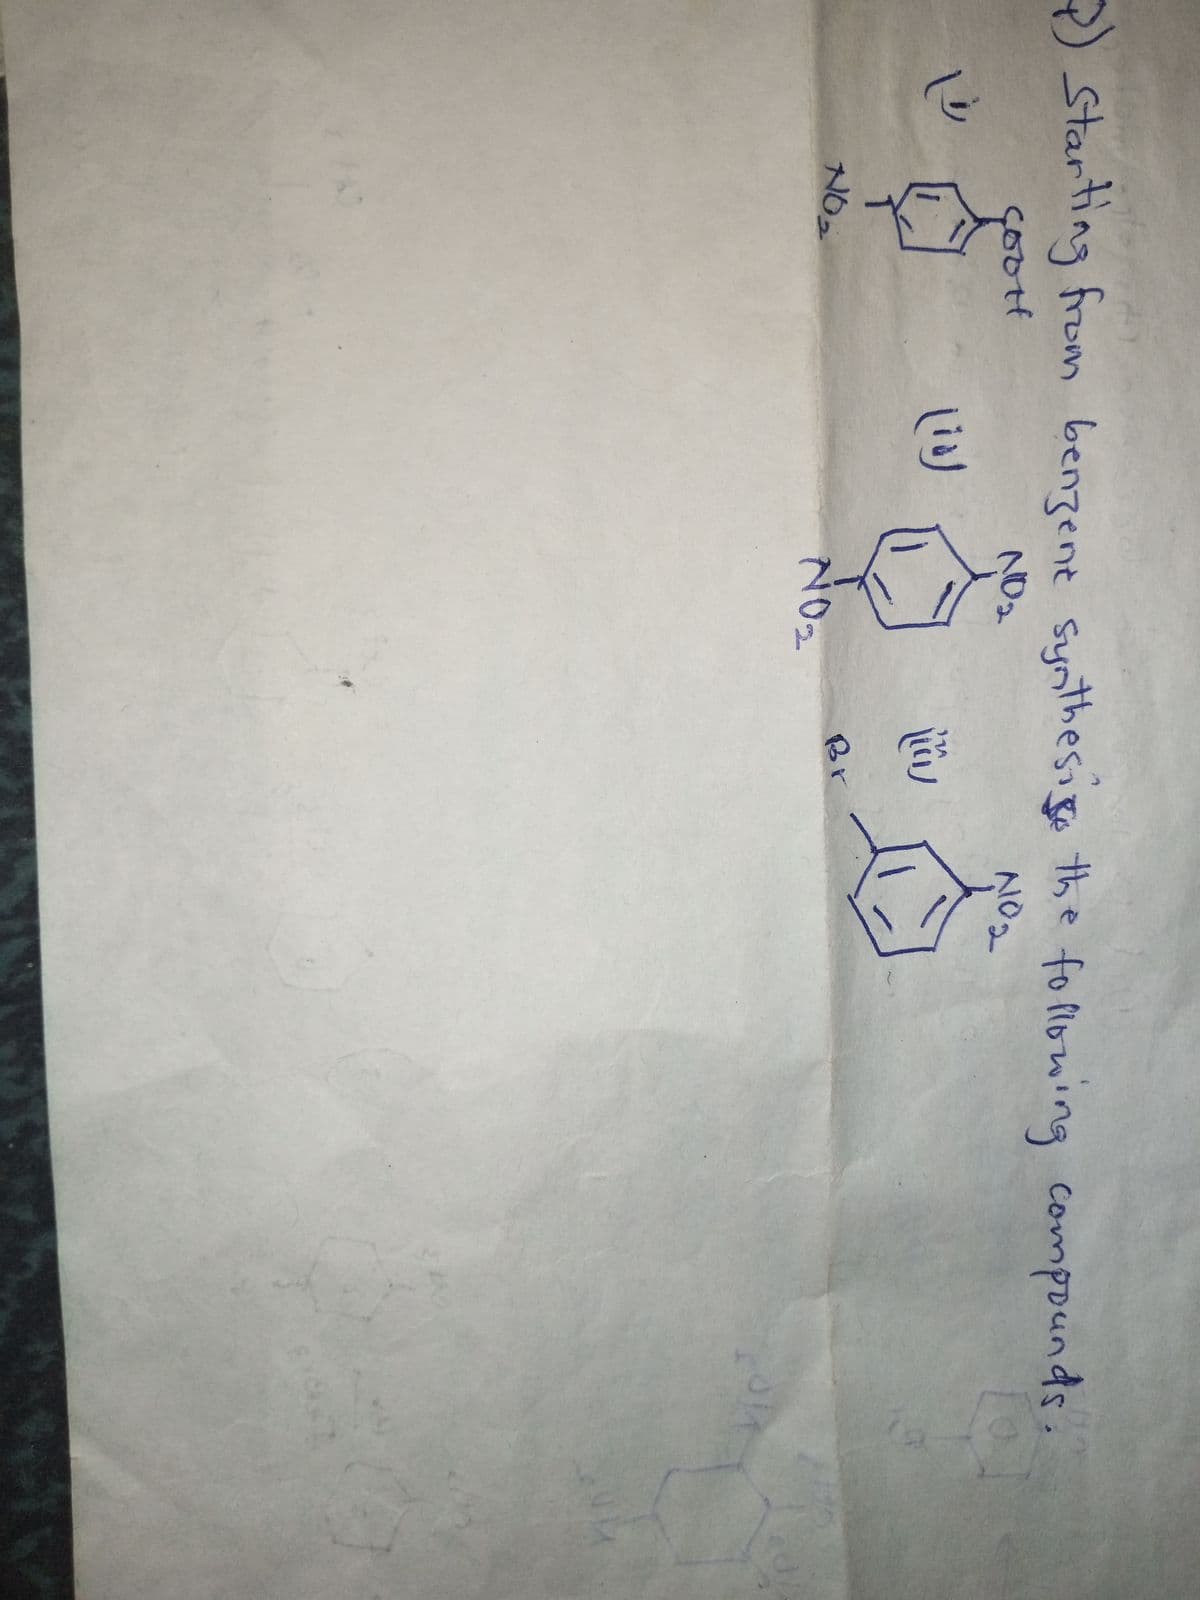 ) Starting from benzent synthesigo the fo lloning compounds.
çooH
NO2
NO2
NO2
NO2
Br
